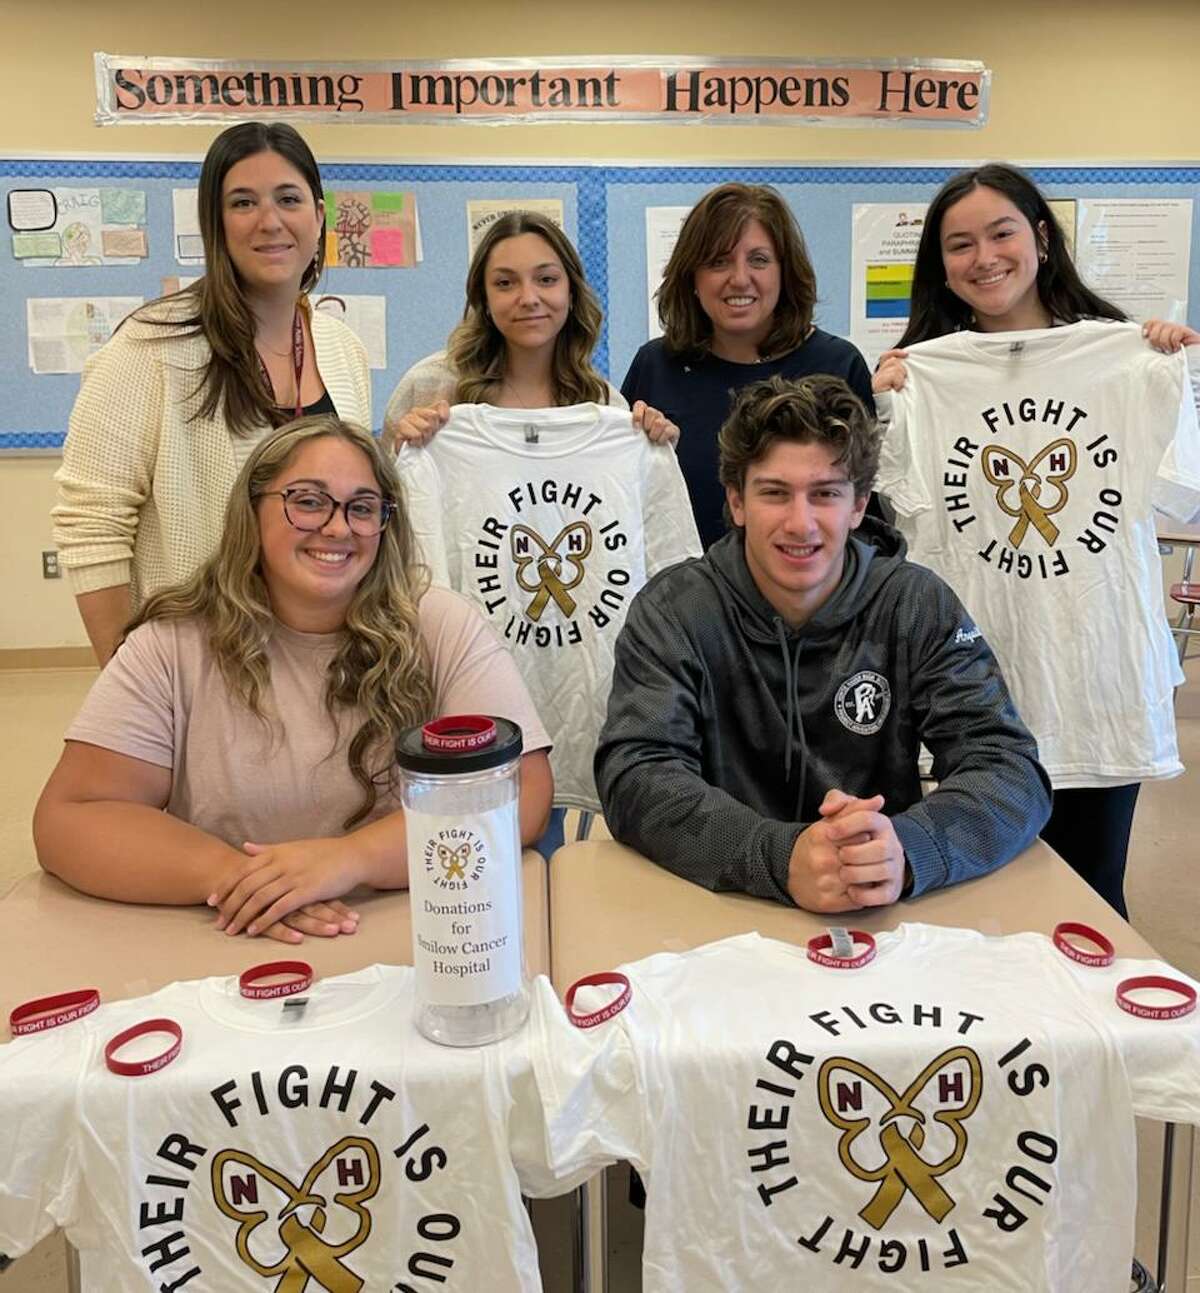 These North Haven High School students and staff raised $2,000 toward a fund to supply young patients at Smilow Cancer Hospital with craft supplies. The fund is in memory of Brenna Zettergren, who lost her battle with cancer at age 5. Front row are: Rebecca Anastasio, Michael Anquillare; back row are: National Honor Society co-adviser Carla DeStefanis, student Juliana Mascia, NHS co-adviser Jennifer Zettergren, Brenna’s mother, and student Eliza O’Connor.